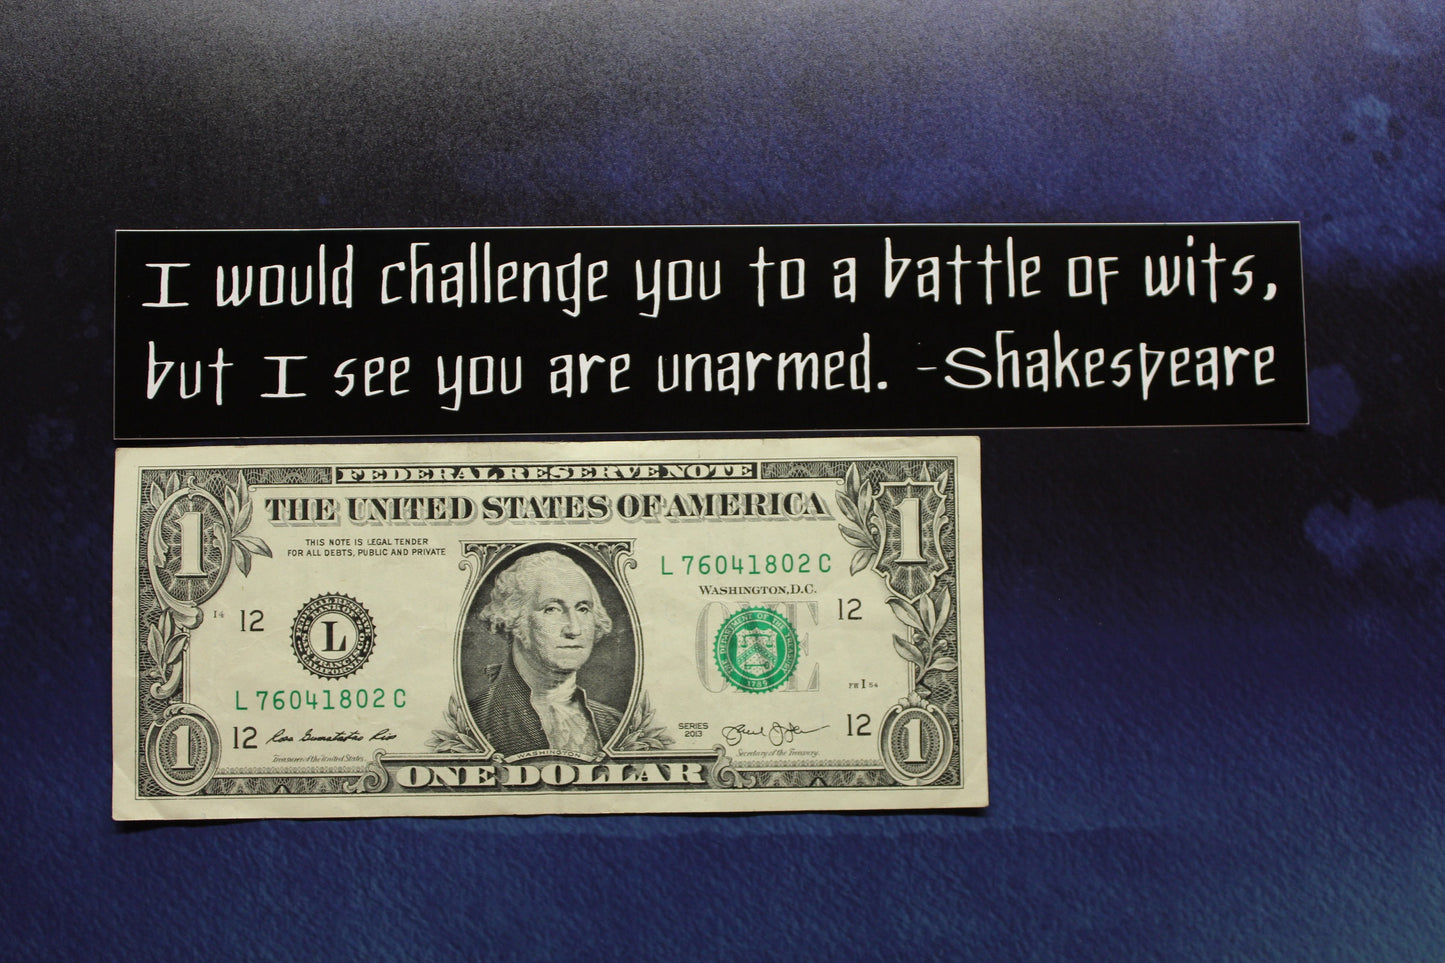 Shakespeare Vinyl Sticker I would challenge you to a battle of wits bumper car bike laptop guitar